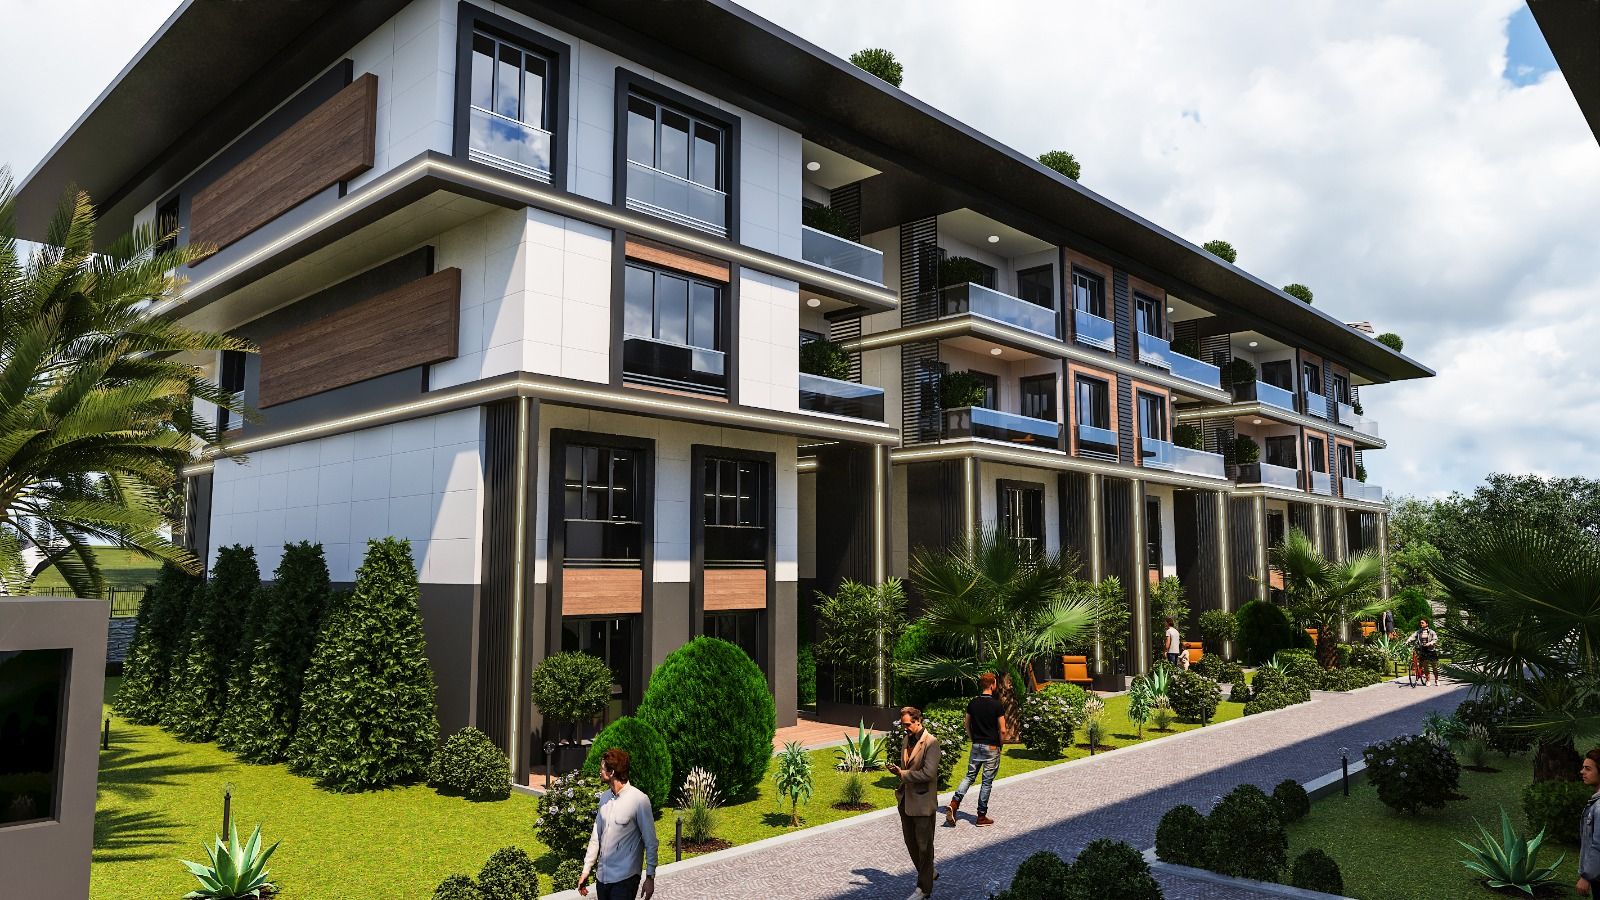 Luxury boutique townhouse project away from the hustle and bustle of Istanbul